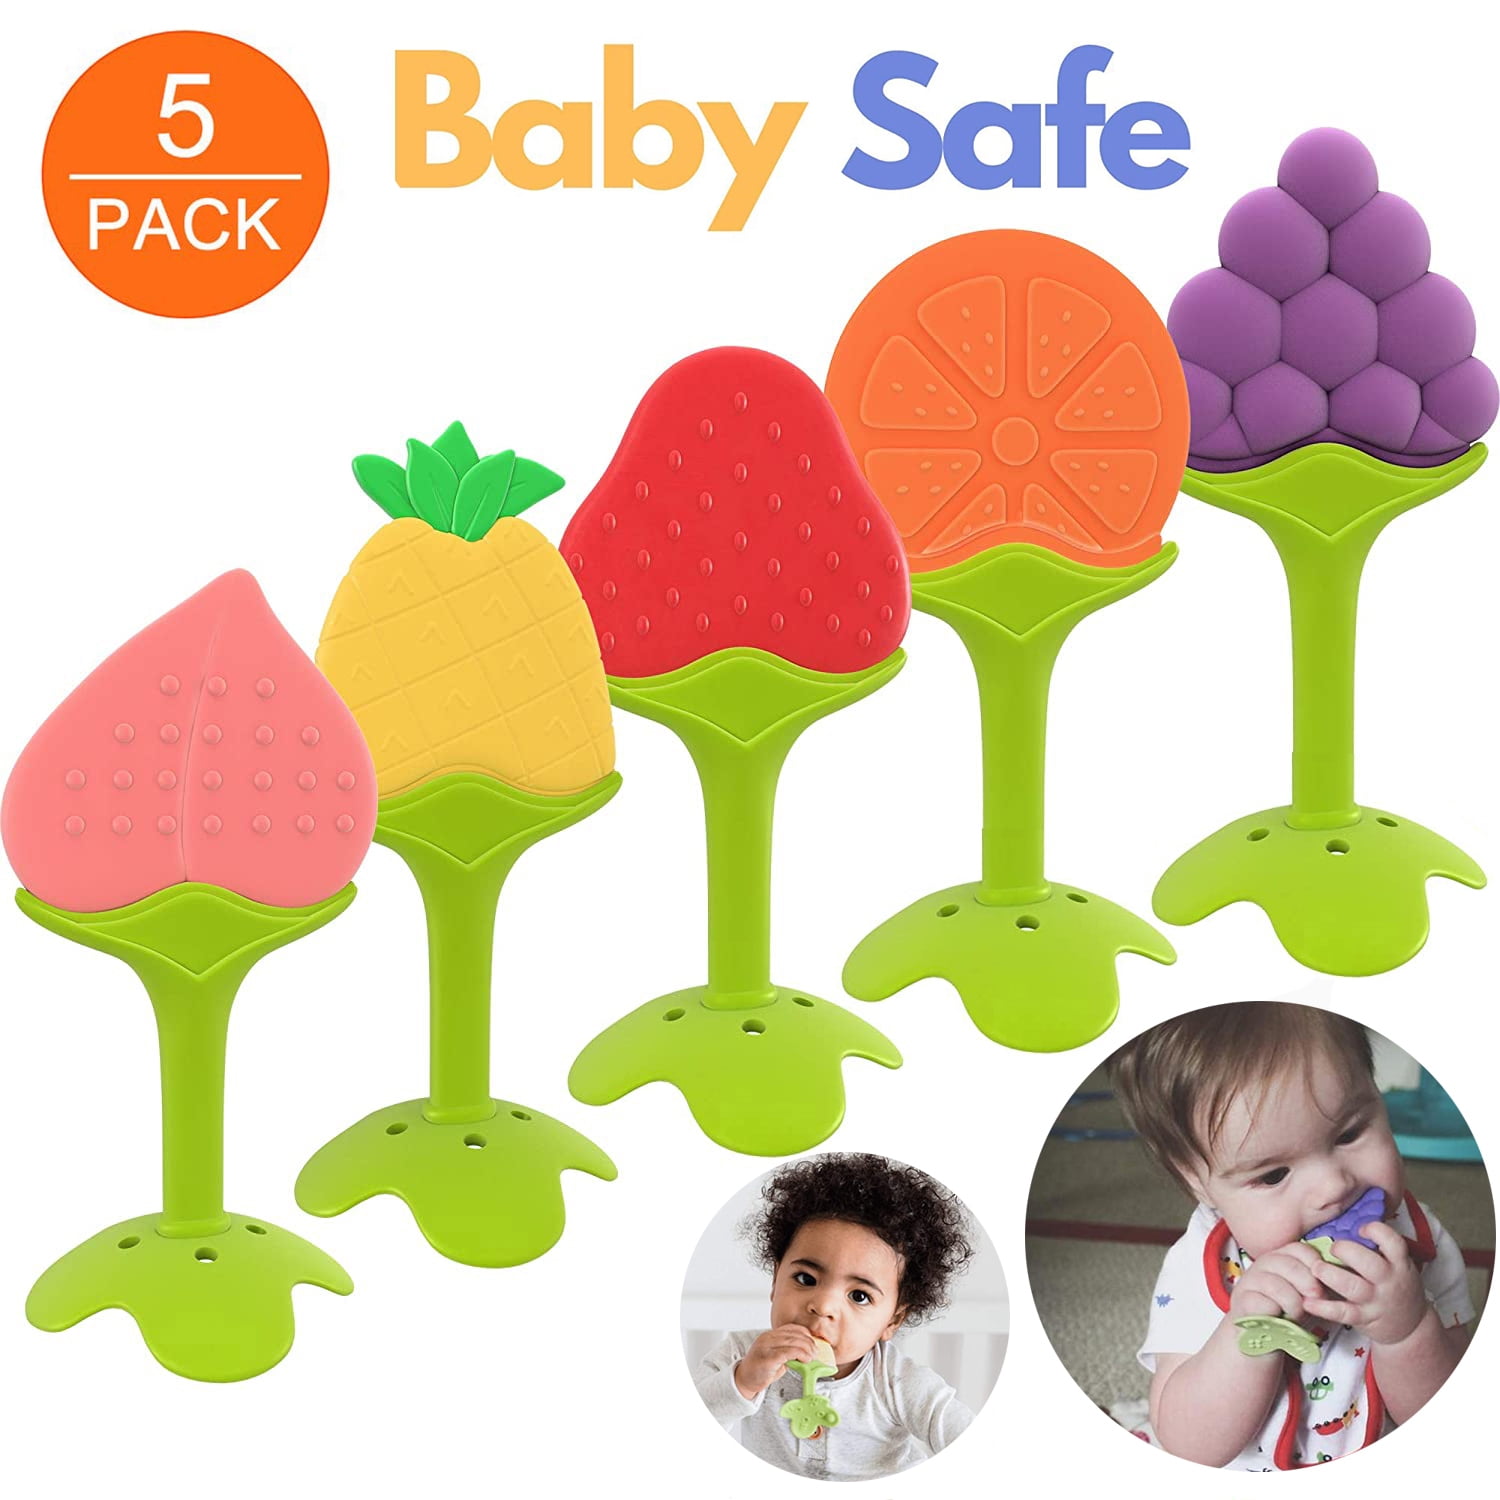 Toddlers Infant Baby Boys Girls Teething Toys Soft Silicone Fruit Teether Holder 